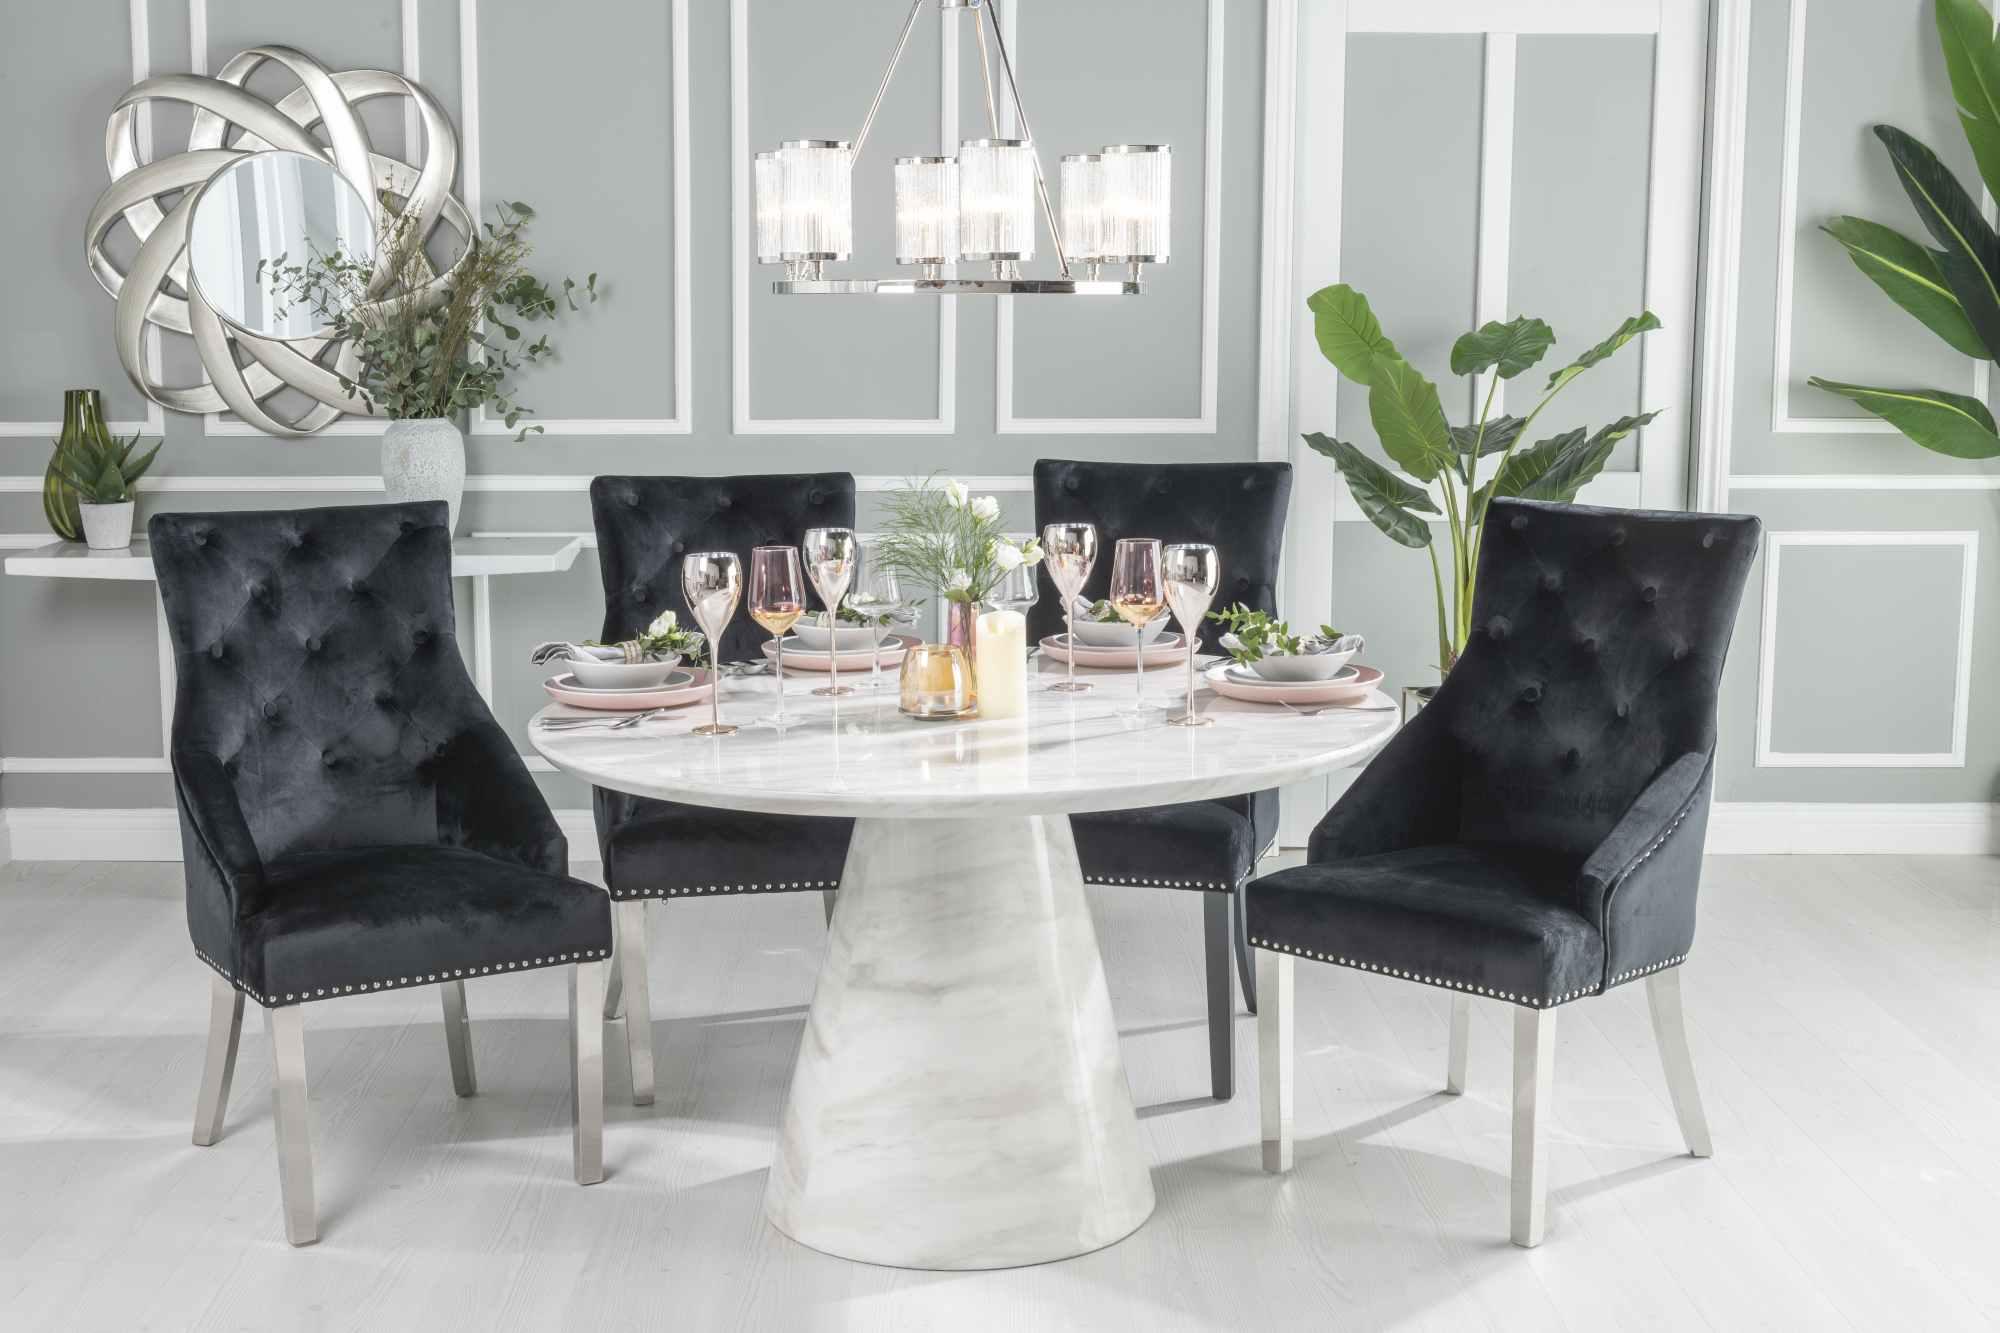 Carrera Marble Dining Table Set for 4 to 6 Diners 130cm Round White Top with Cone Pedestal Base - Black Knockerback Chairs